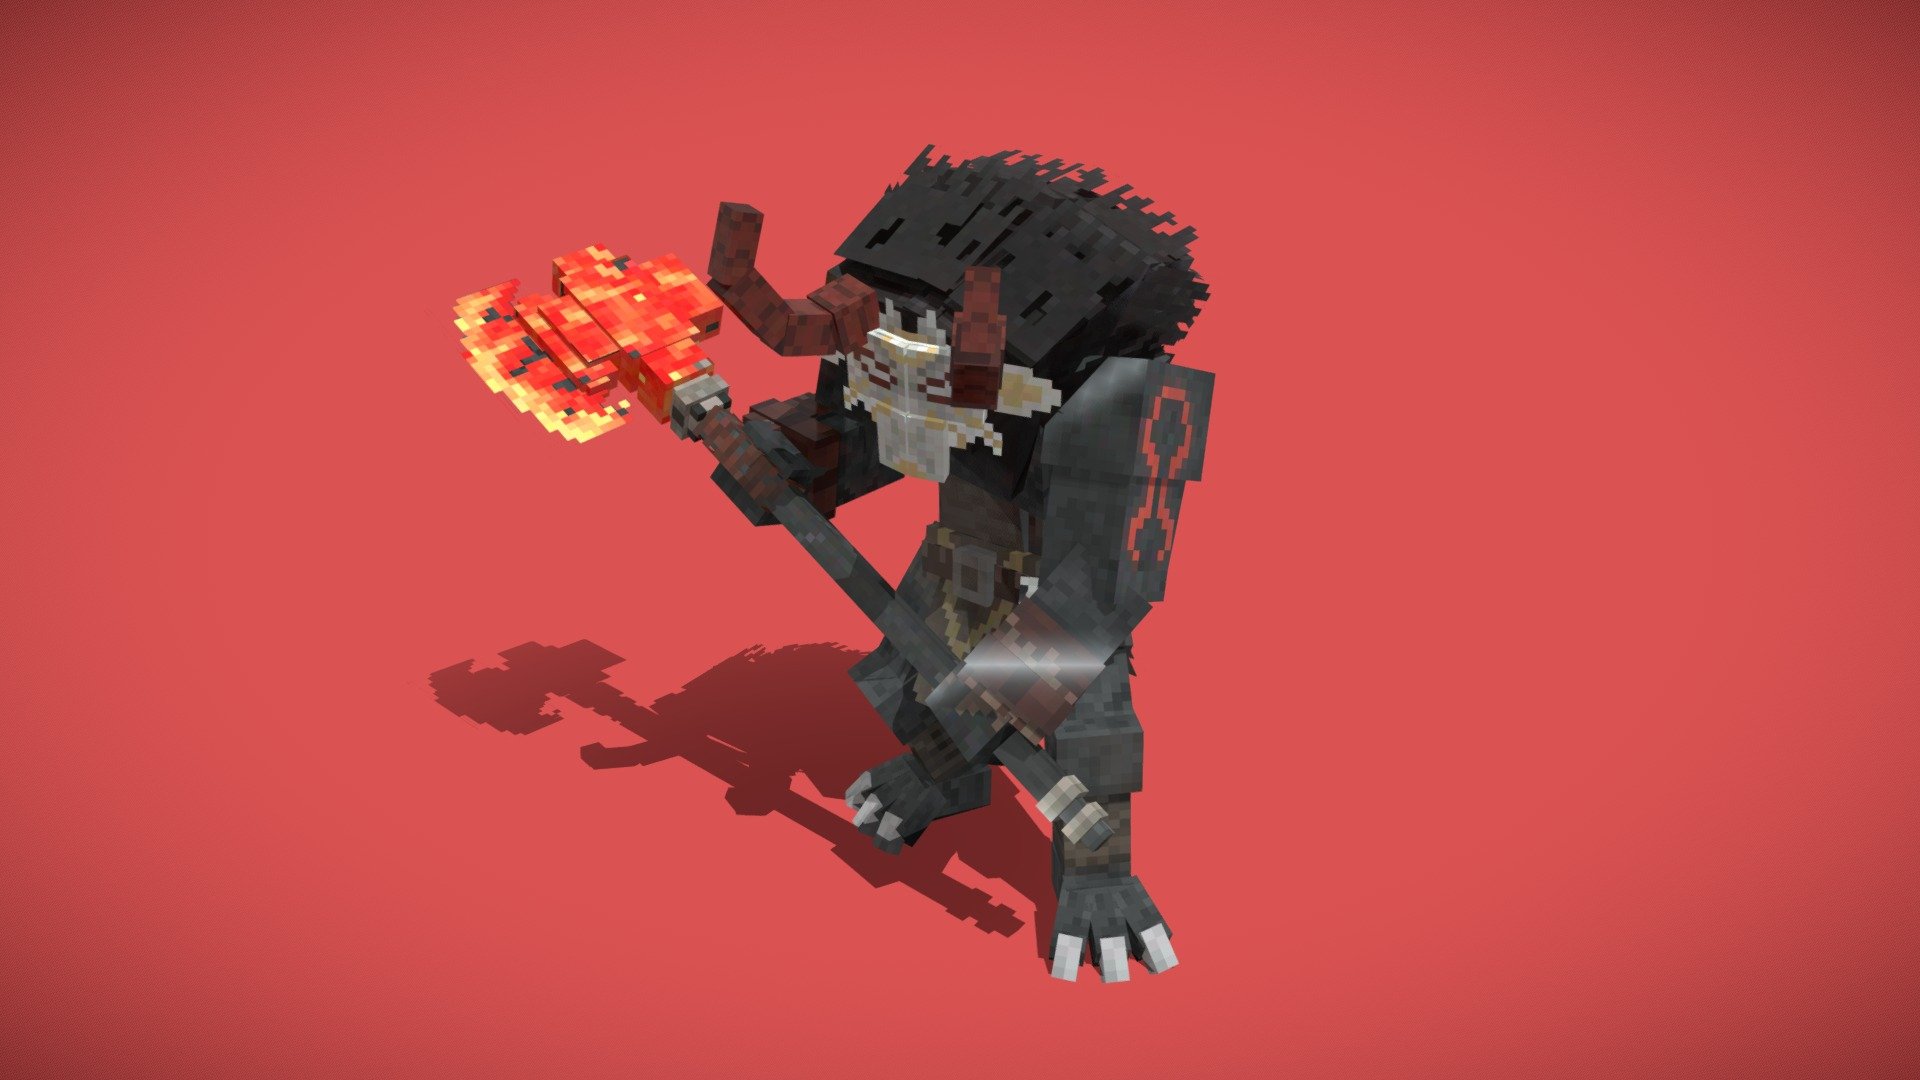 Muscular hilichurls who wield large two-handed axes.
Attacks with large strikes, and will use Pyro Slimes to infuse their axes with Pyro. They are very lethal.
Usually, repeated quenching a weapon the way a Blazing Axe Mitachurl does will decrease the hardness of the metal and cause the axe-head's edge to chip more easily. But such is the strength of the mitachurls that even should the edge disappear altogether, they can still use their axes as hammers.

For questions, please contact here: IBarysta#5254 - Mitachurl - Genshin Impact - 3D model by IBARYSTA 3d model